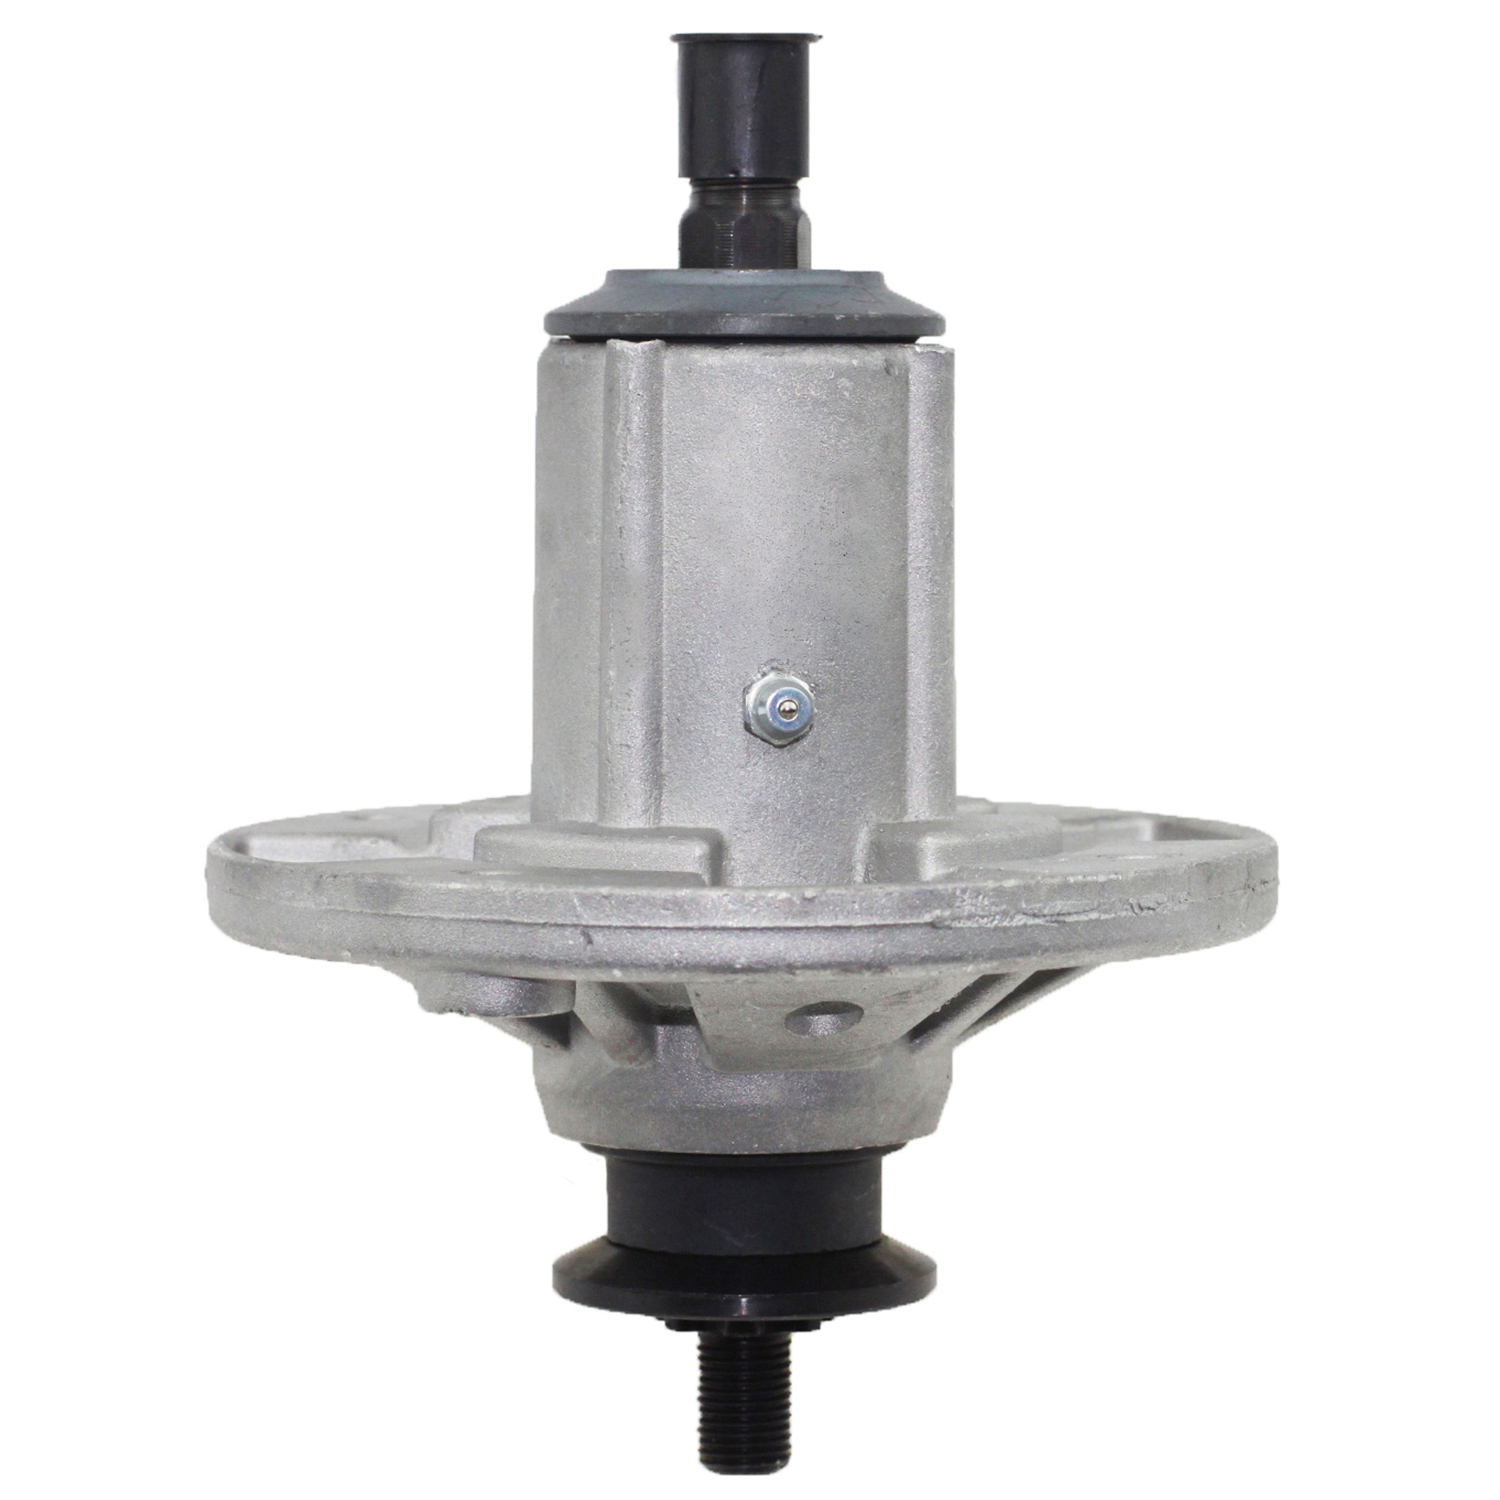 Replacement mower spindle assy for Oregon 82-358, John Deere AM136733, AM143469, AM137097